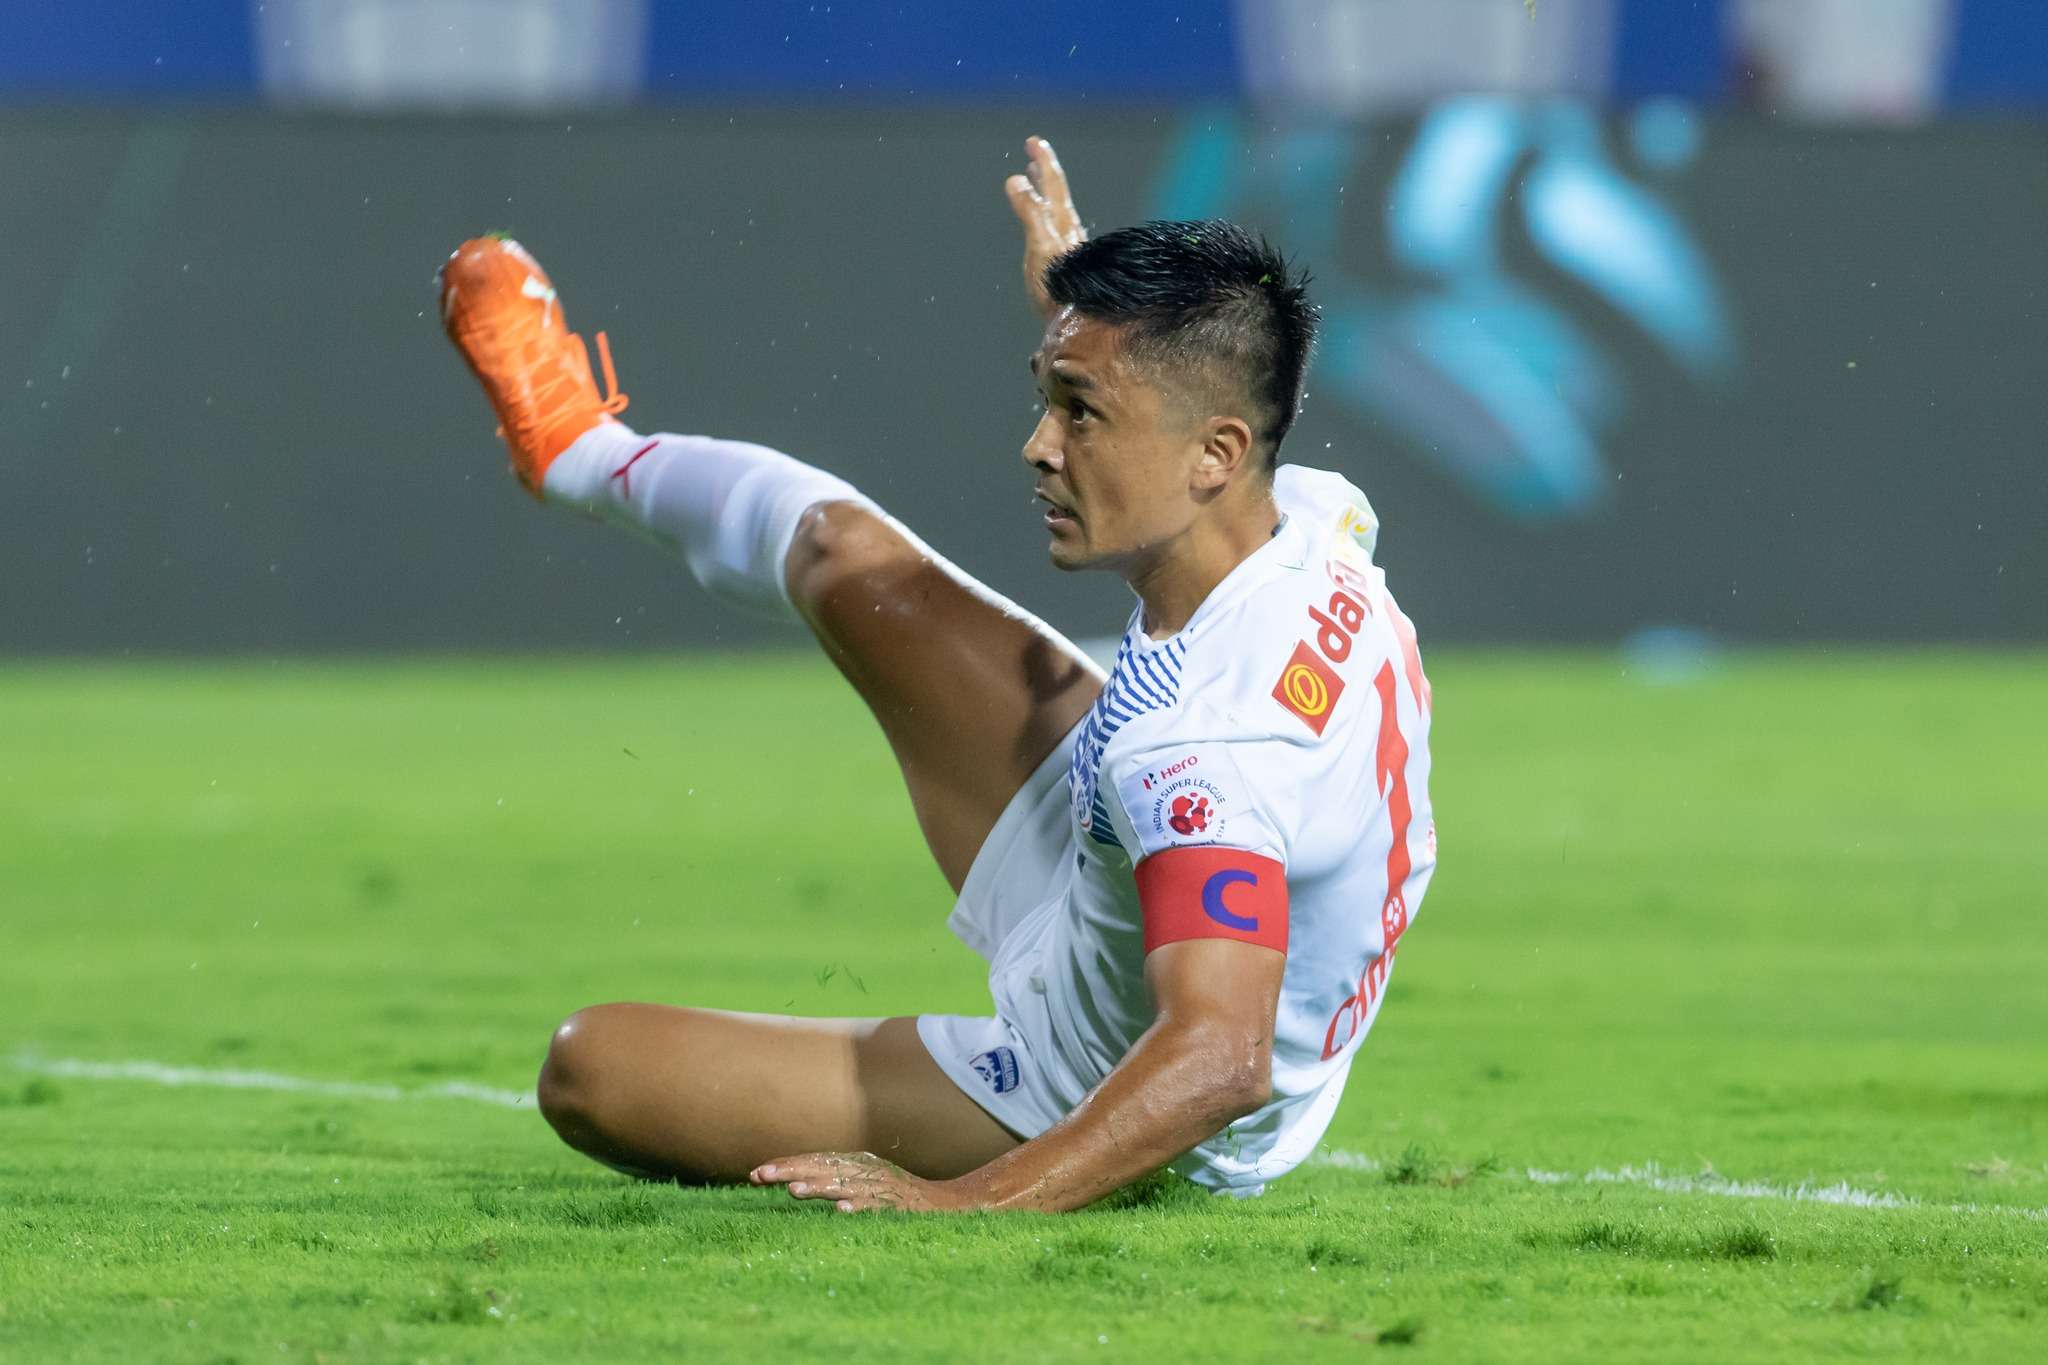 NorthEast United ended Bengaluru FC's hopes for the play-offs